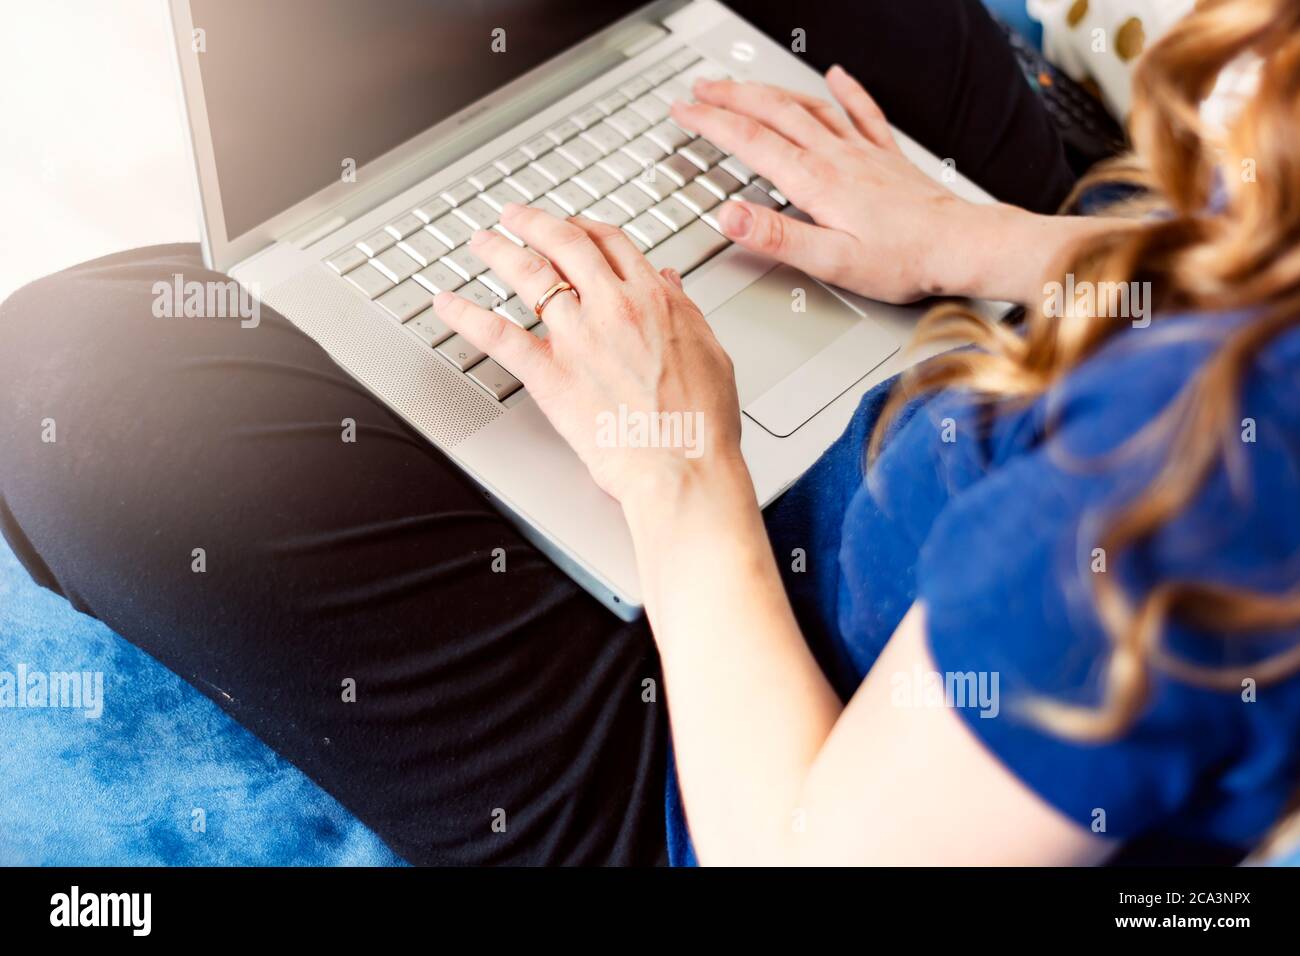 young caucasian woman typing on a laptop keyboard. Working from home. Smart working concept. Work at home Stock Photo